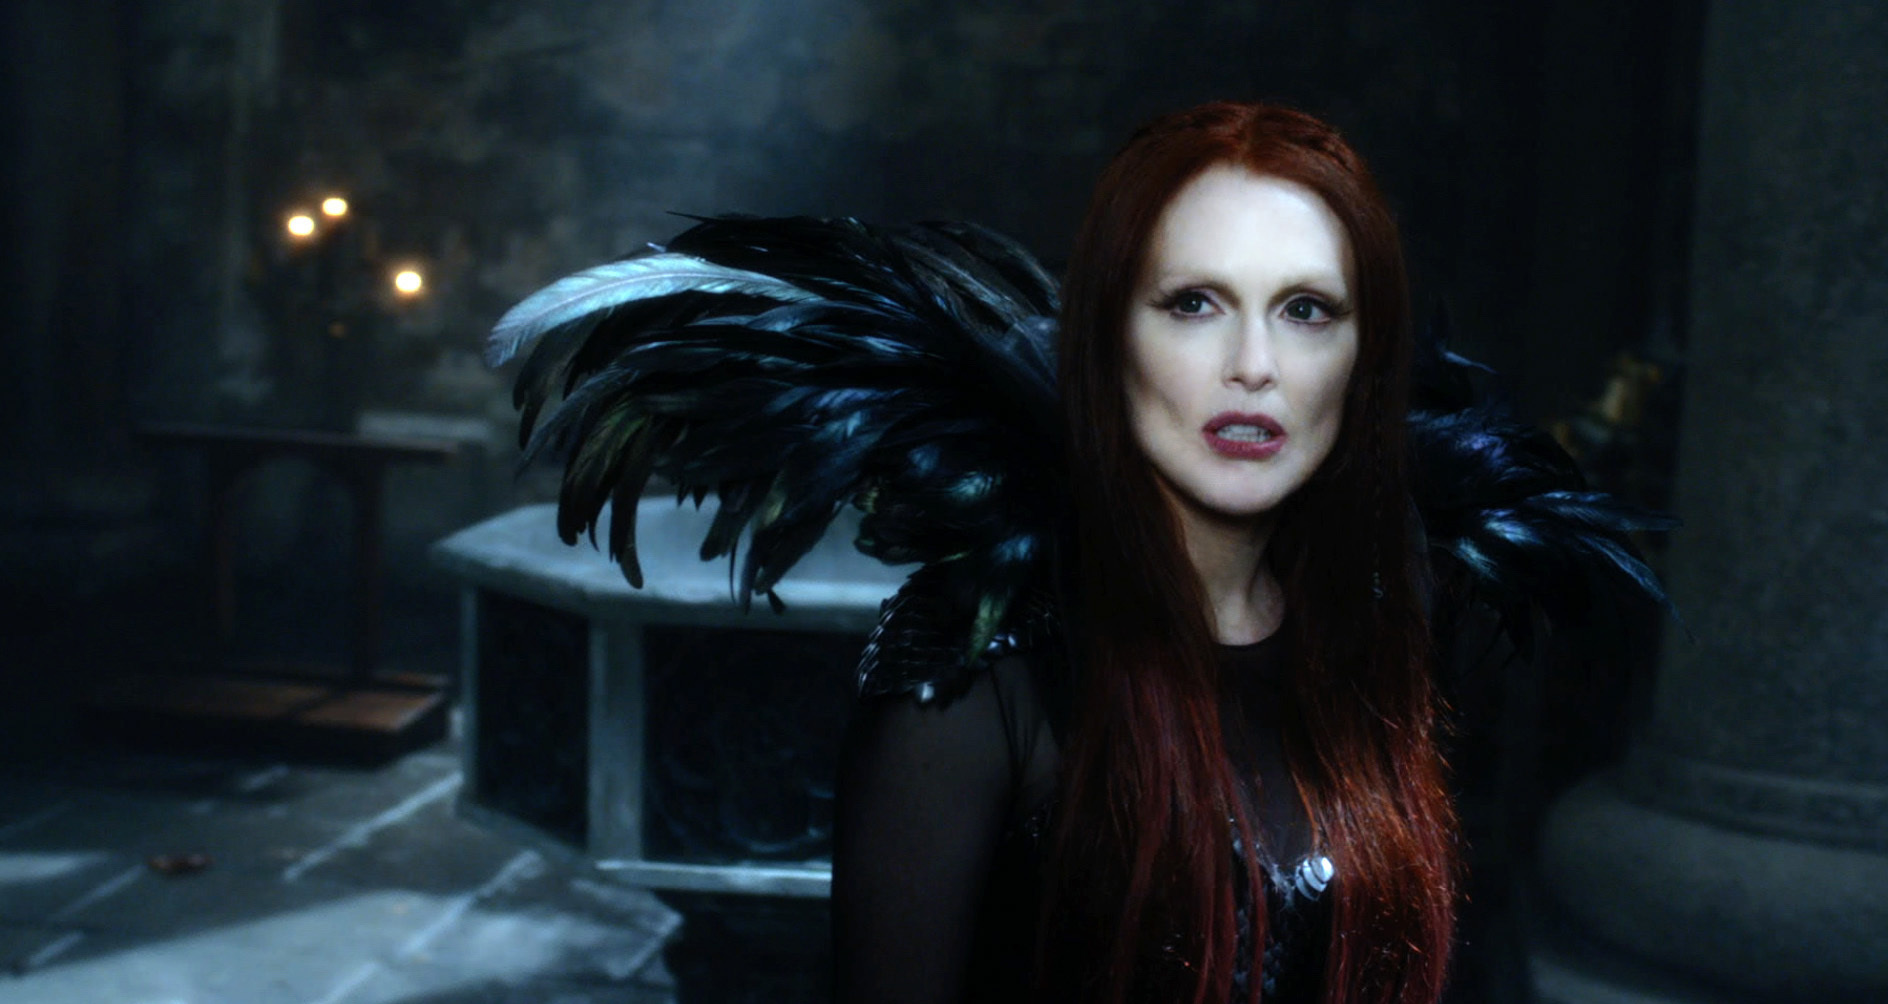 Seventh Son Wallpapers